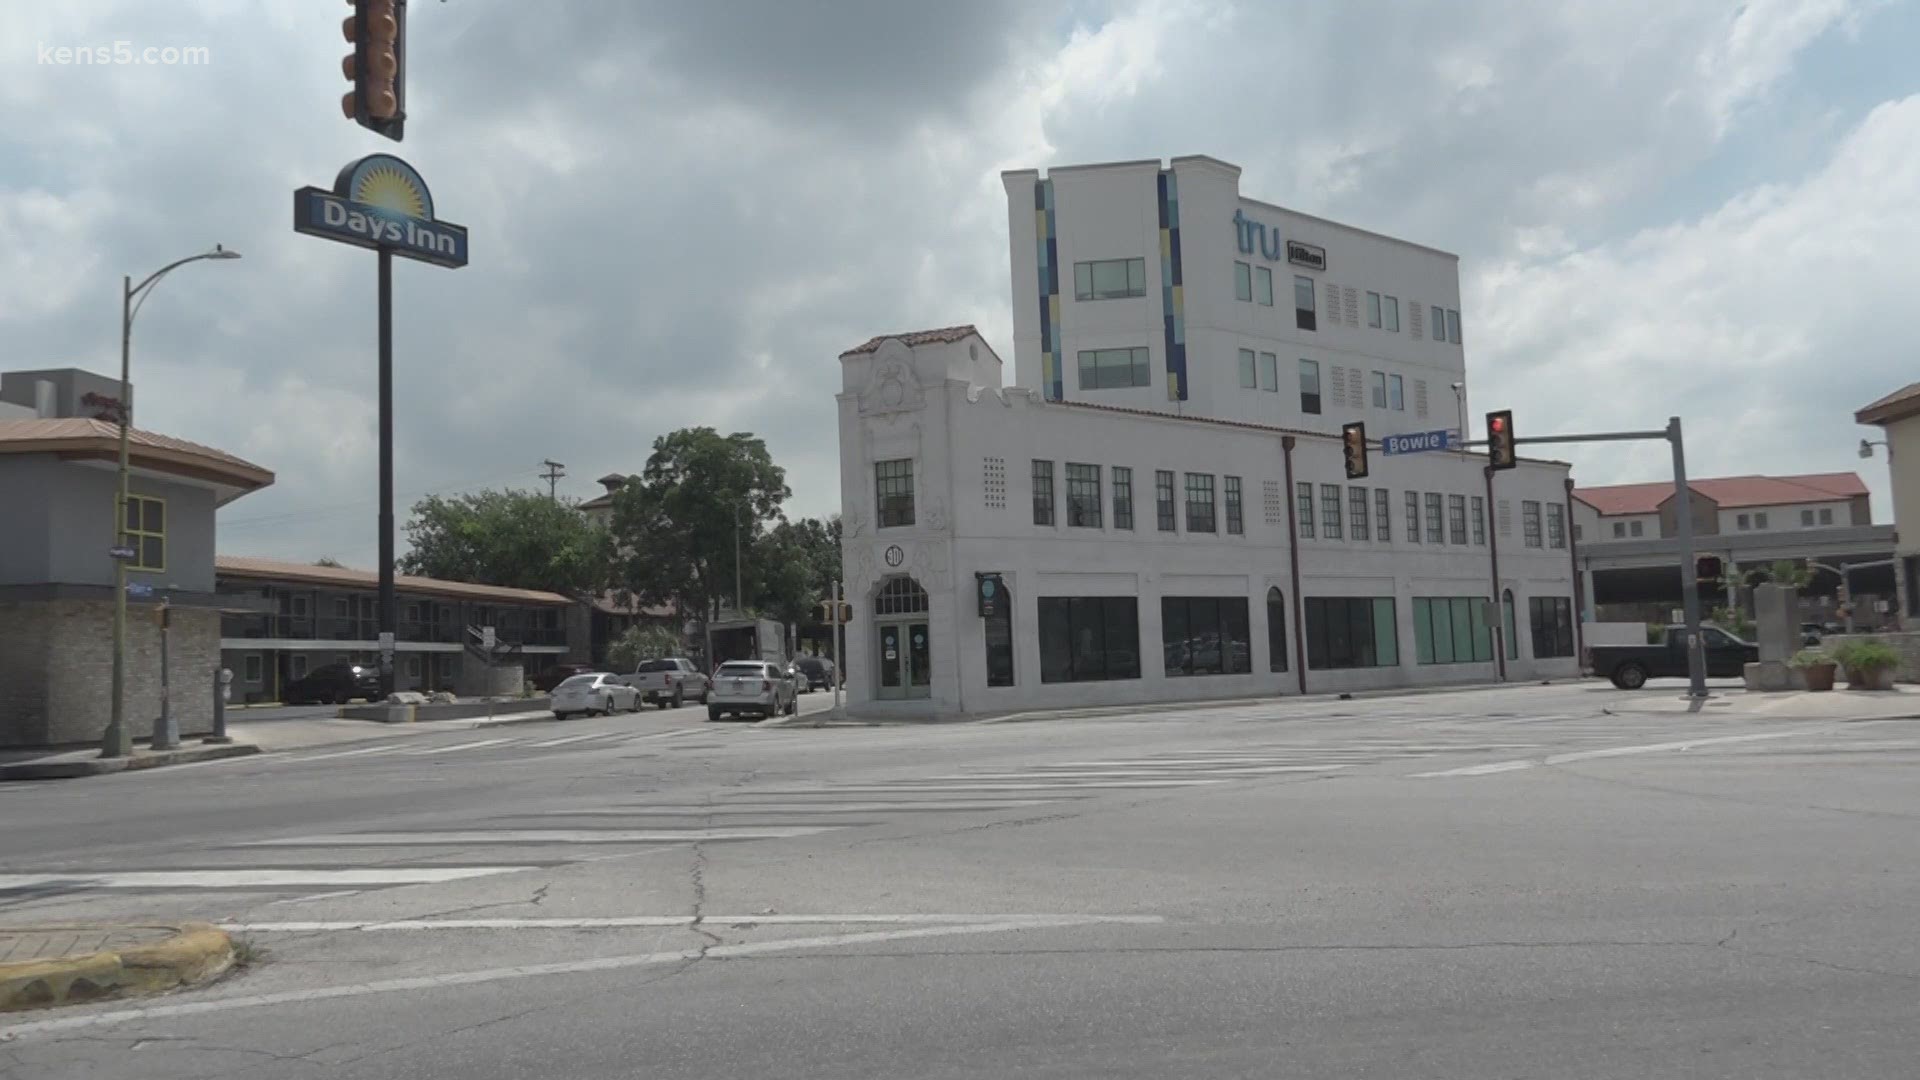 The Days Inn off East Houston Street will be turned into a homeless shelter following majority approval by the San Antonio City Council on Thursday.